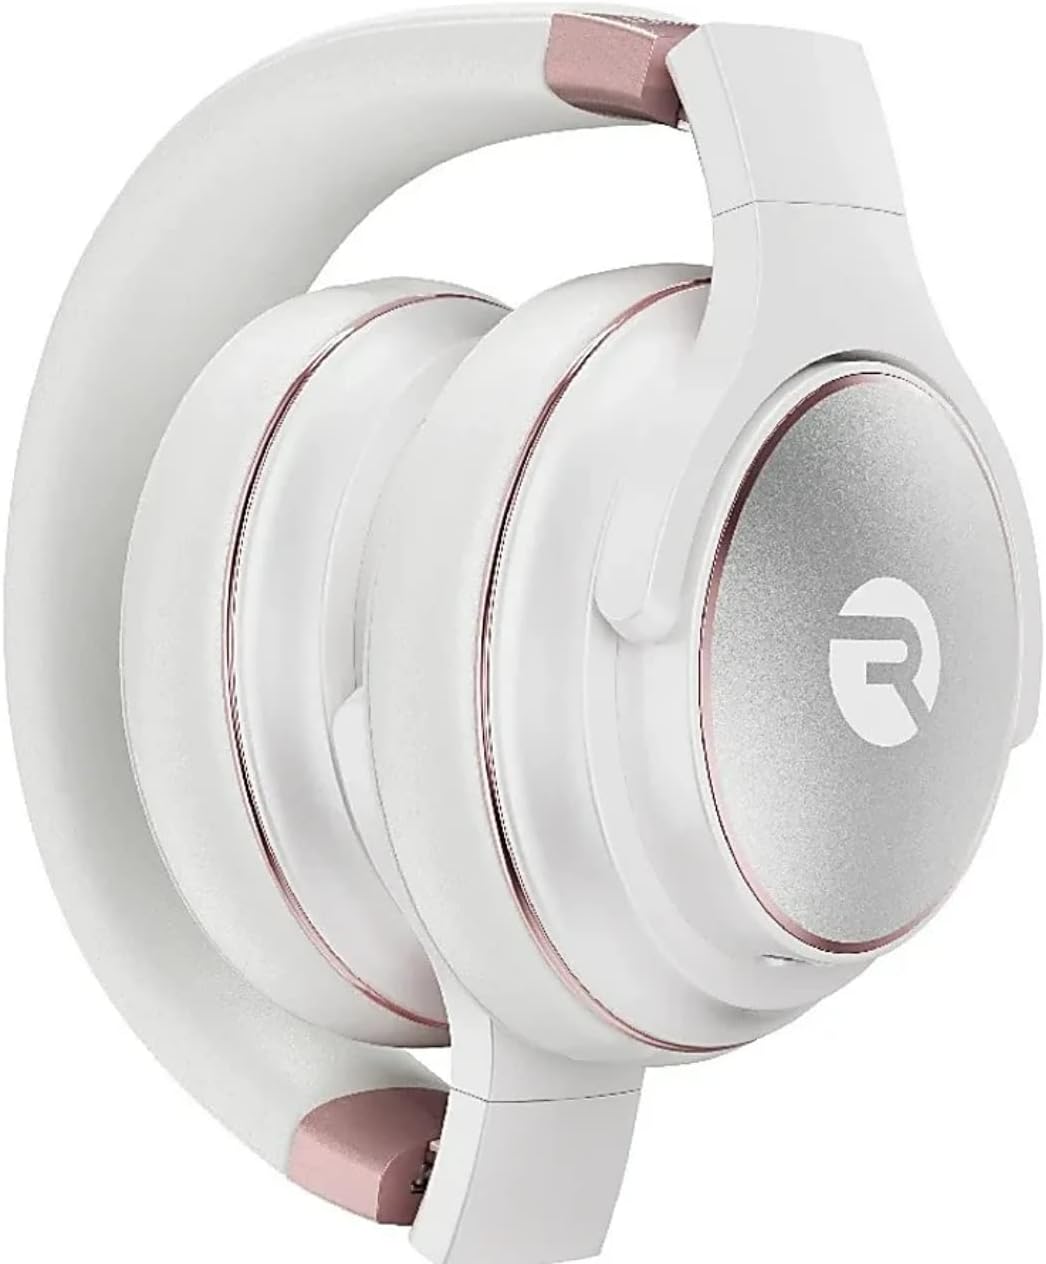 Raycon Everyday Wireless Bluetooth Over Ear Headphones, with Active Noise Cancelling, Awareness Mode and Built in Microphone, IPX 4 Water Resistance, 38 Hours of Battery Life (Frost White)